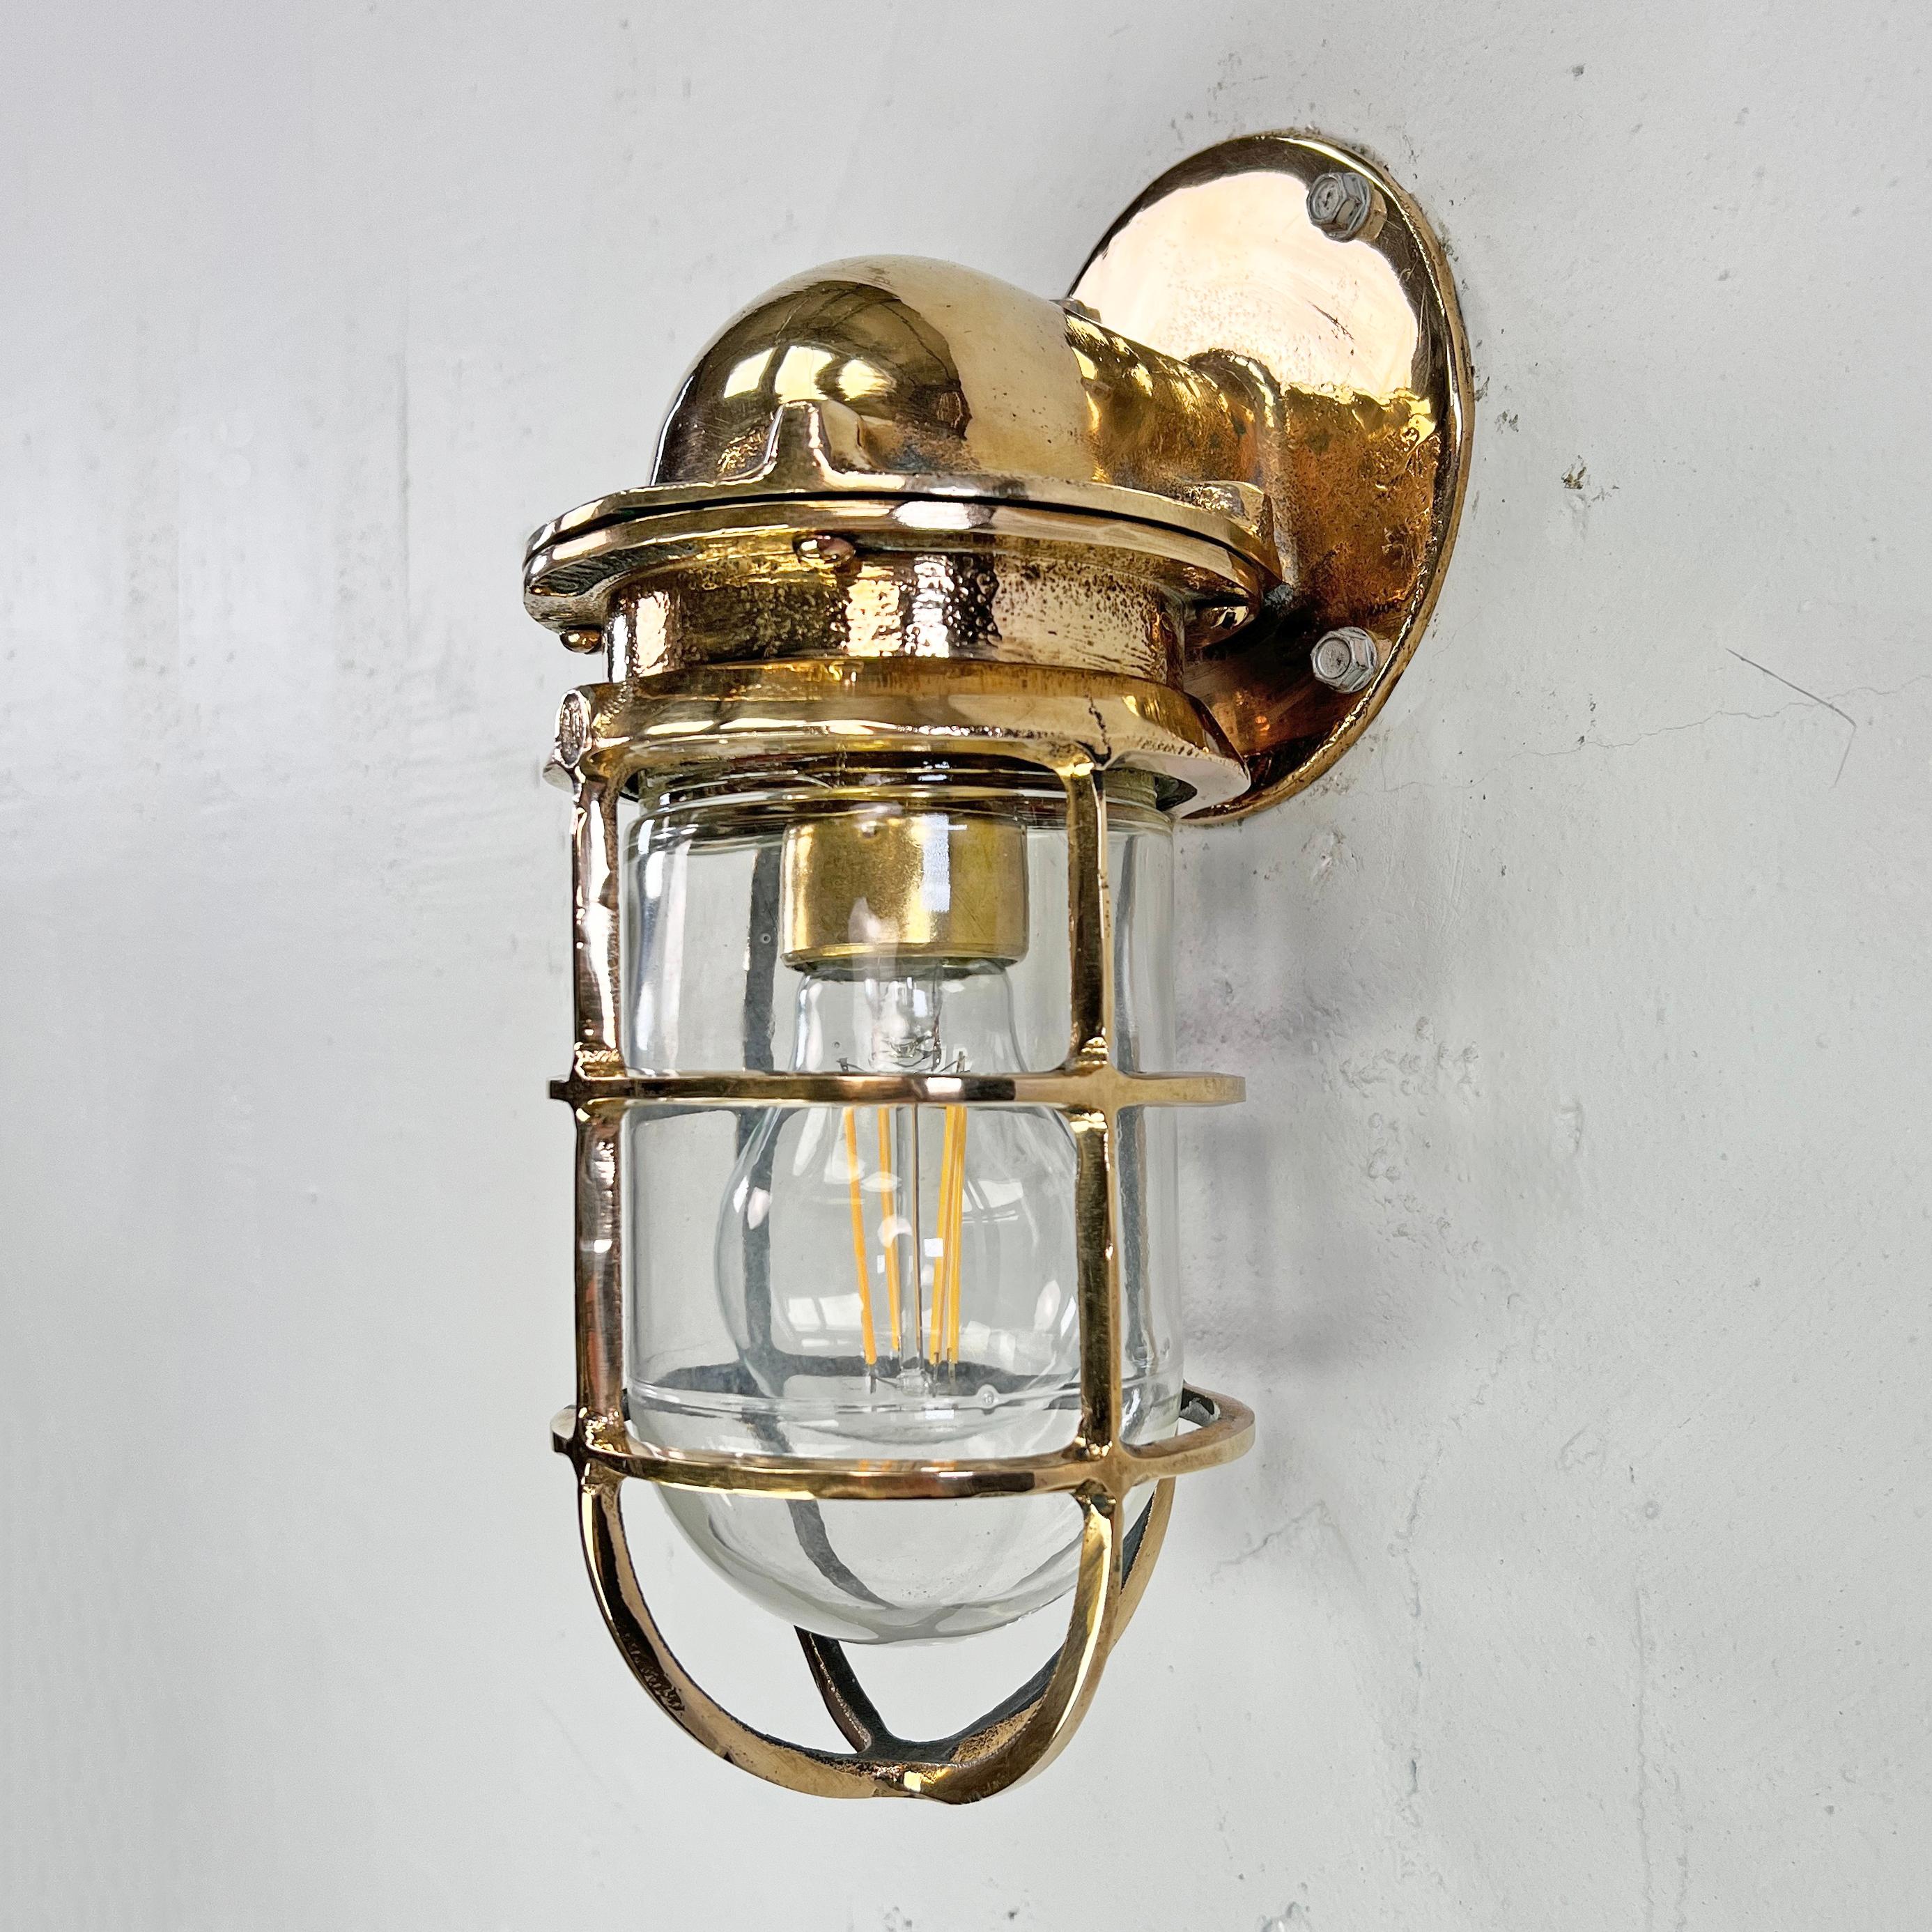 1960's American Cast Bronze & Glass Wall Sconce with Cage by Oceanic UL For Sale 6